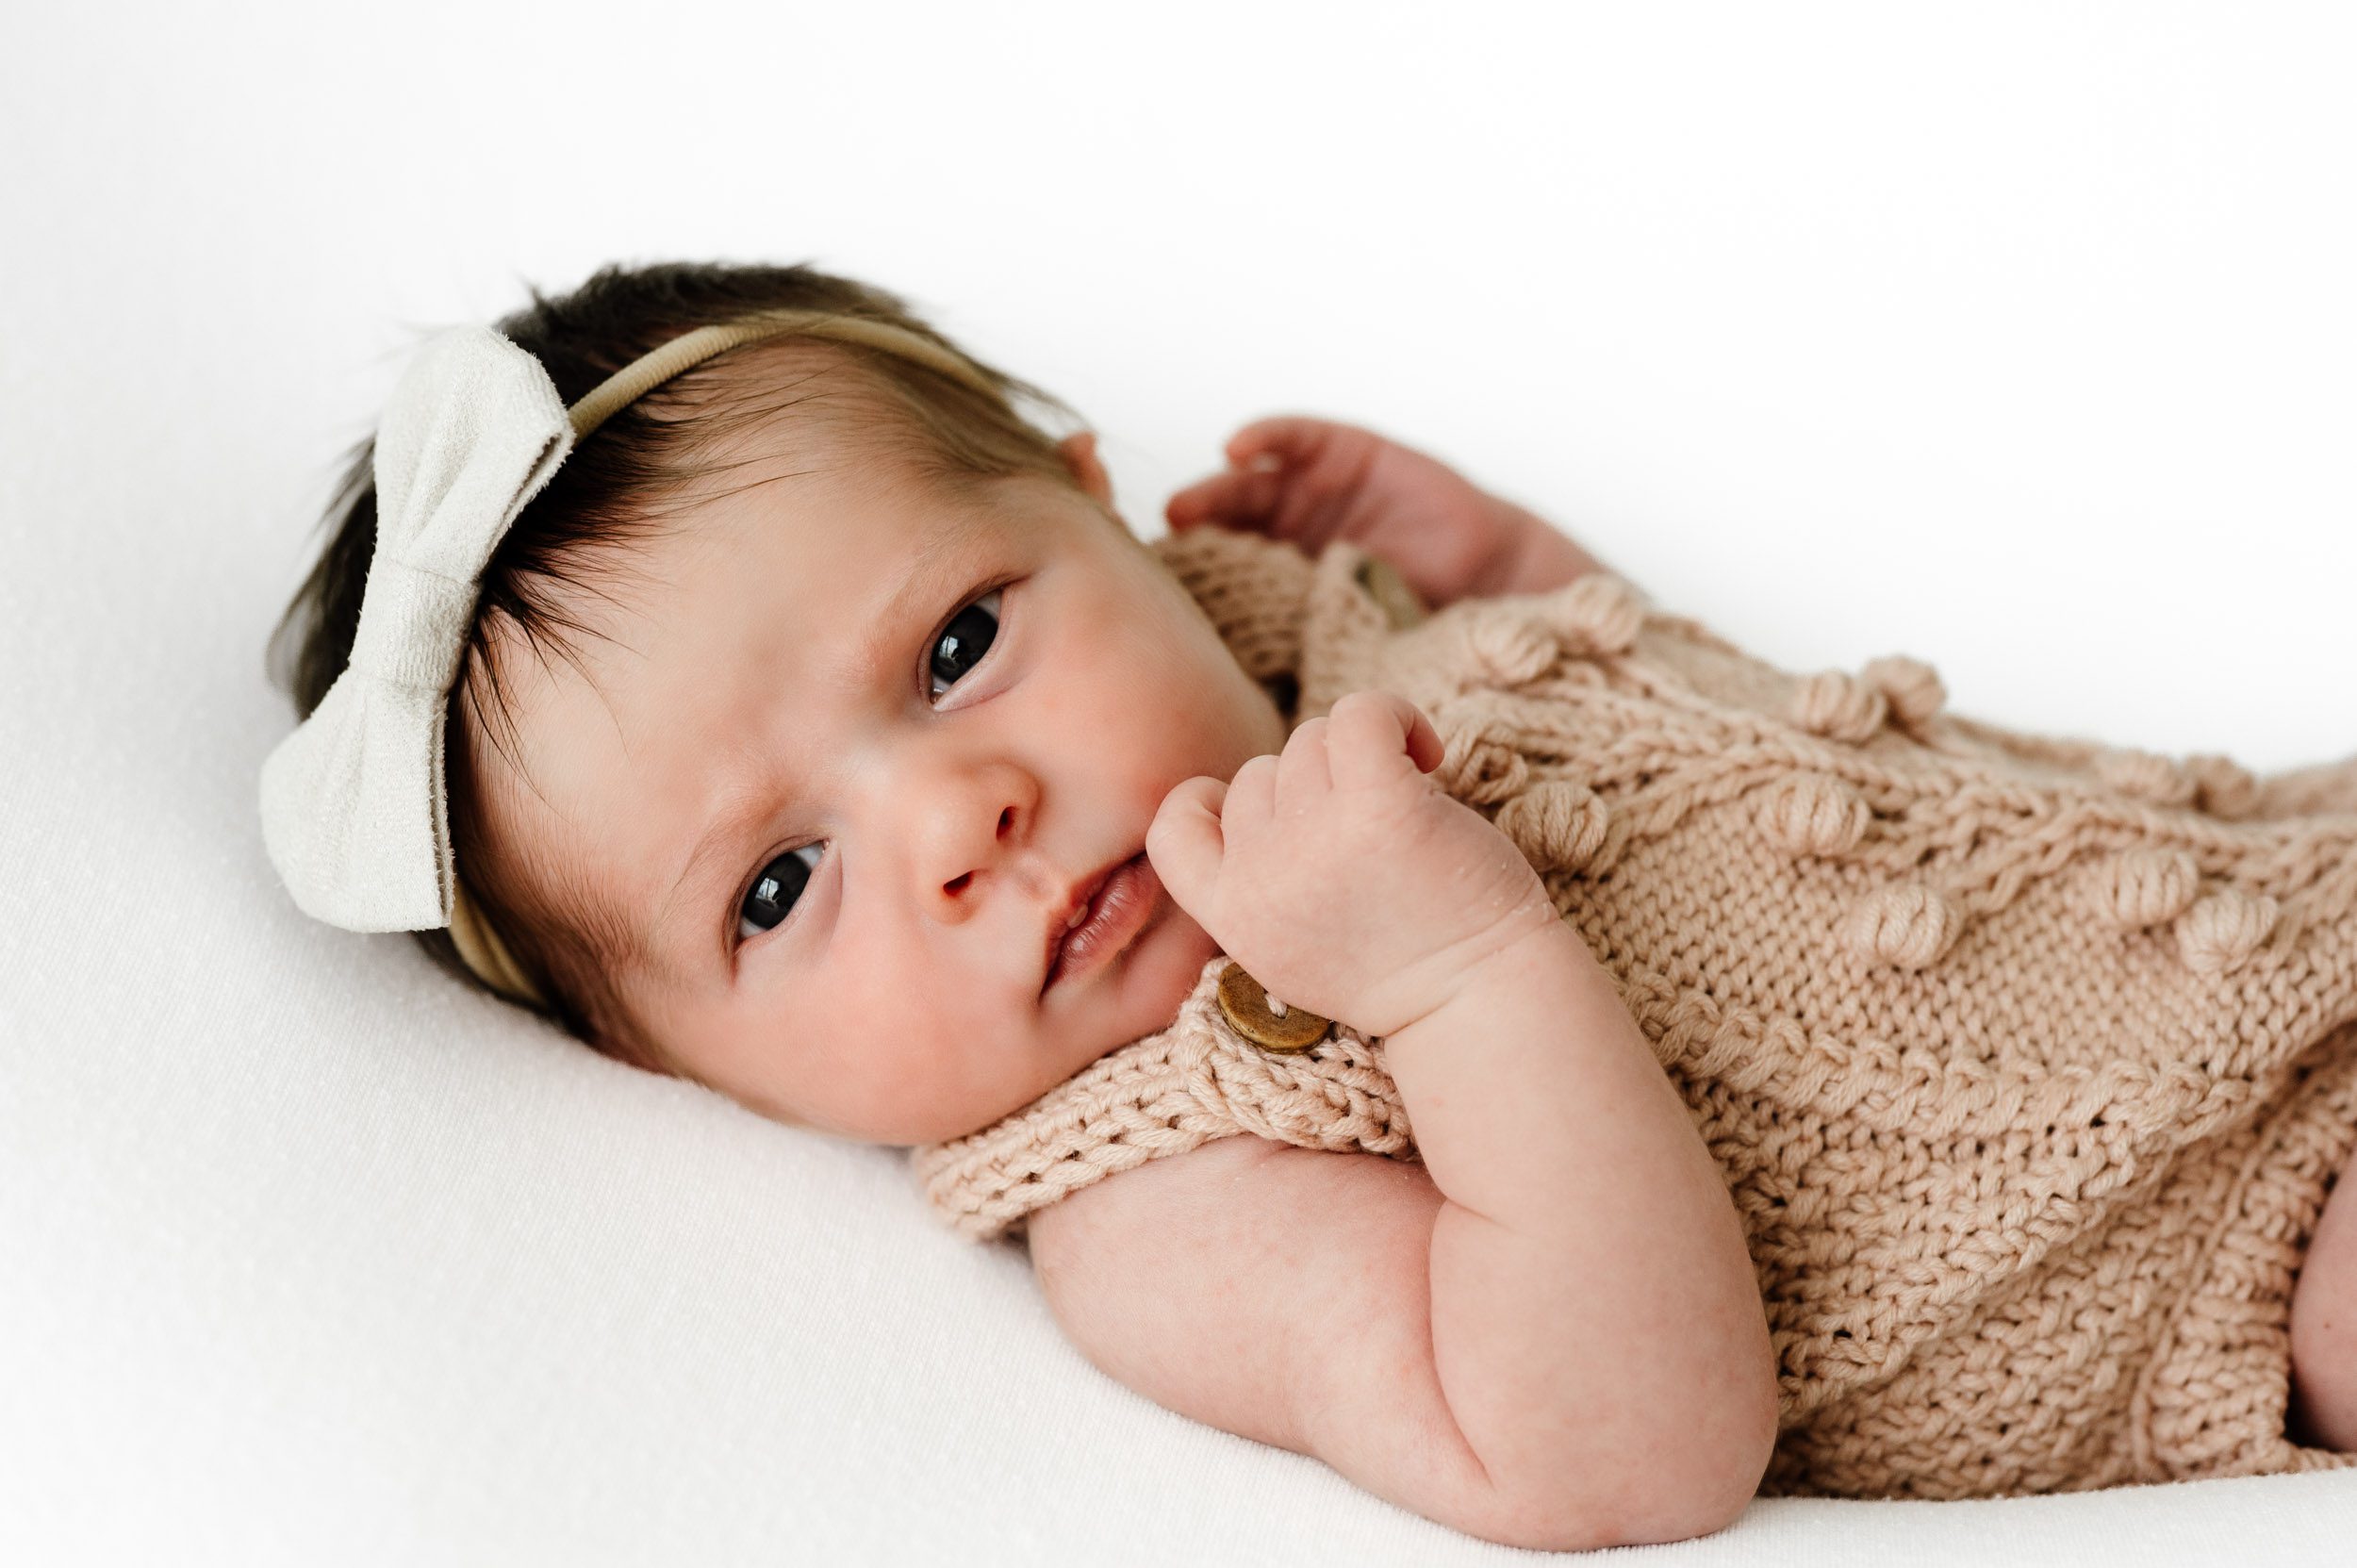 a baby girl waring a light pink knit romper and white headband laying on a white backdrop and touching her finger to her cheek as she looks directly at the camera during a natural newborn studio photoshoot